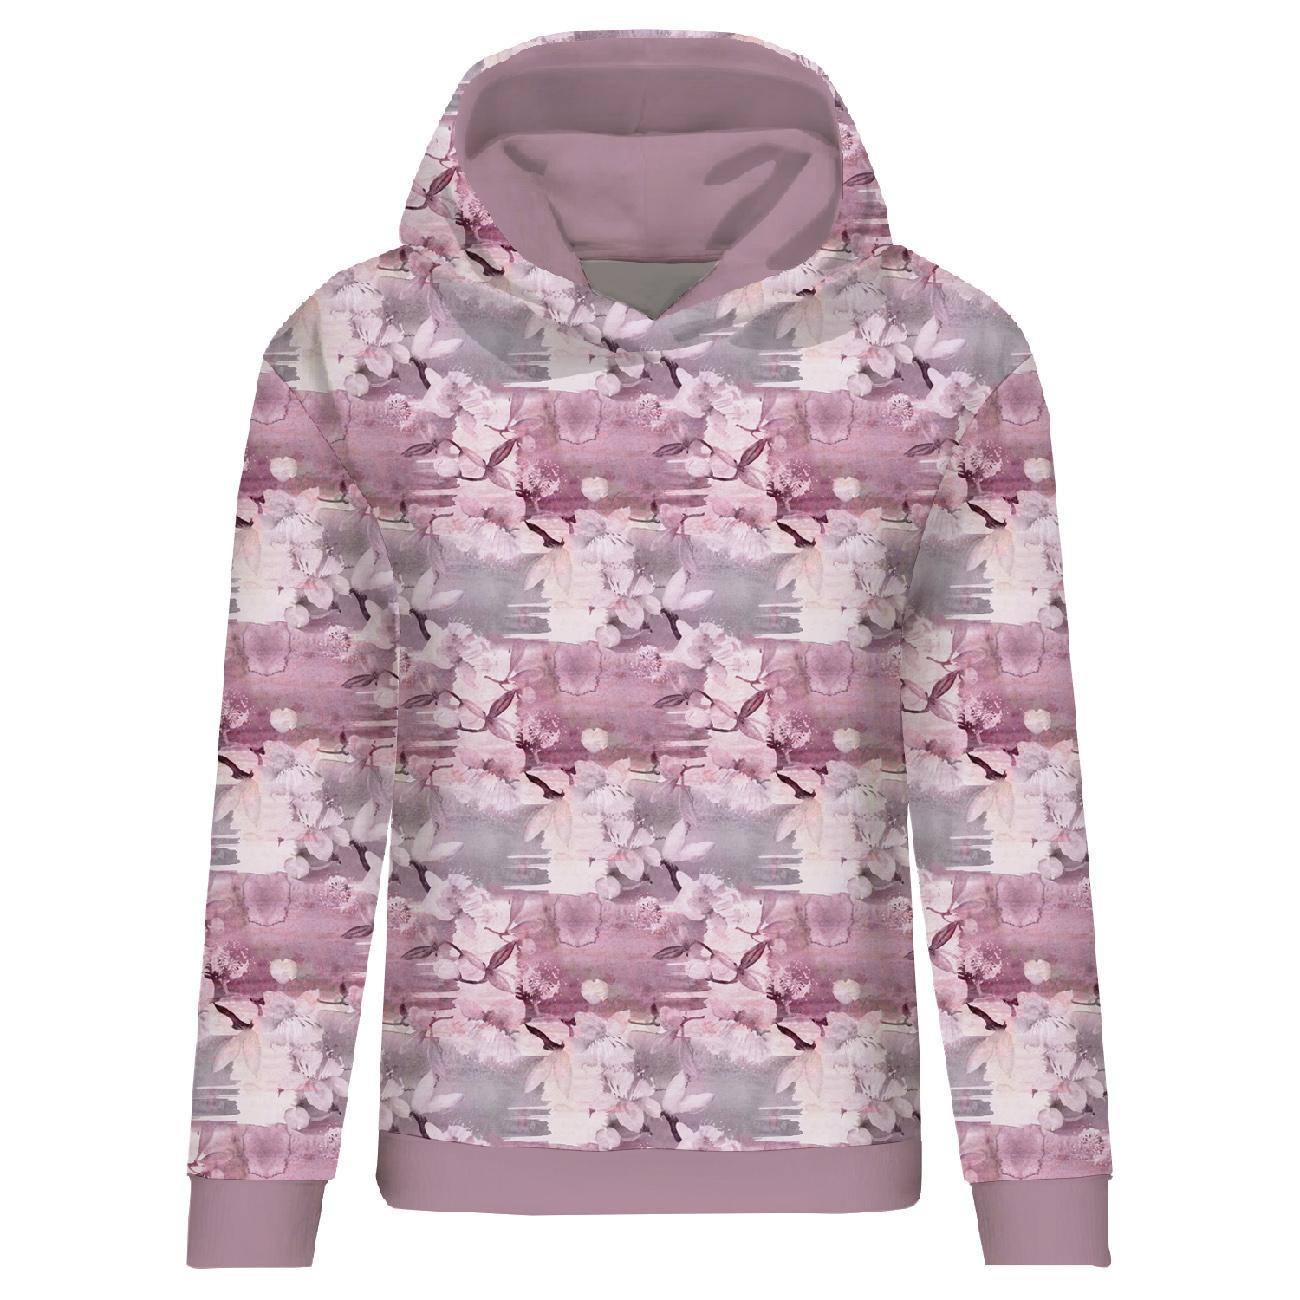 CLASSIC WOMEN’S HOODIE (POLA) - PINK PARADISE PAT. 1 - looped knit fabric 